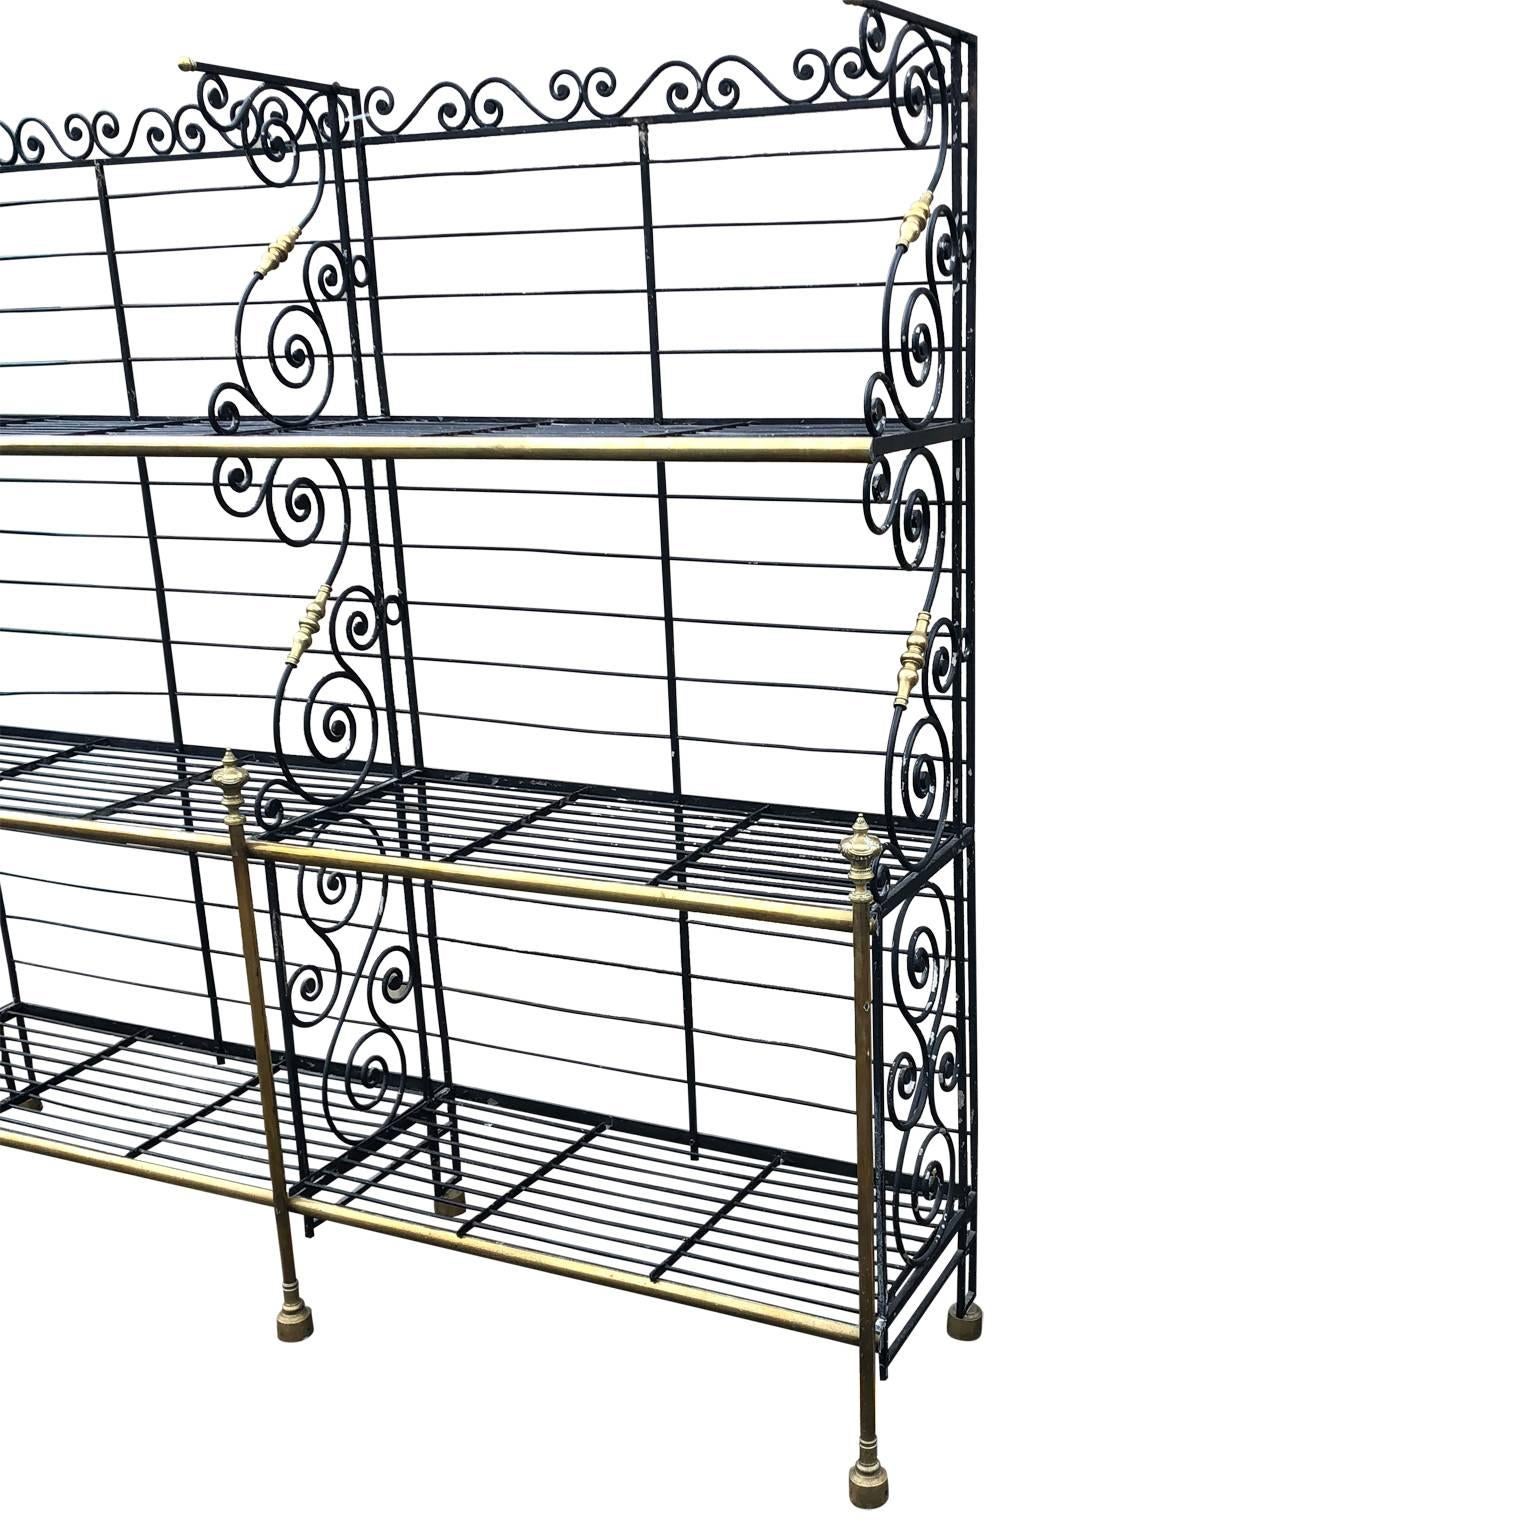 Large antique bakers rack made of black painted wrought iron and brass with great patina.
This particular rack has 3 especially rare decorated brass finials. One corner is rounded which is also rare and should be helpful in a kitchen installation